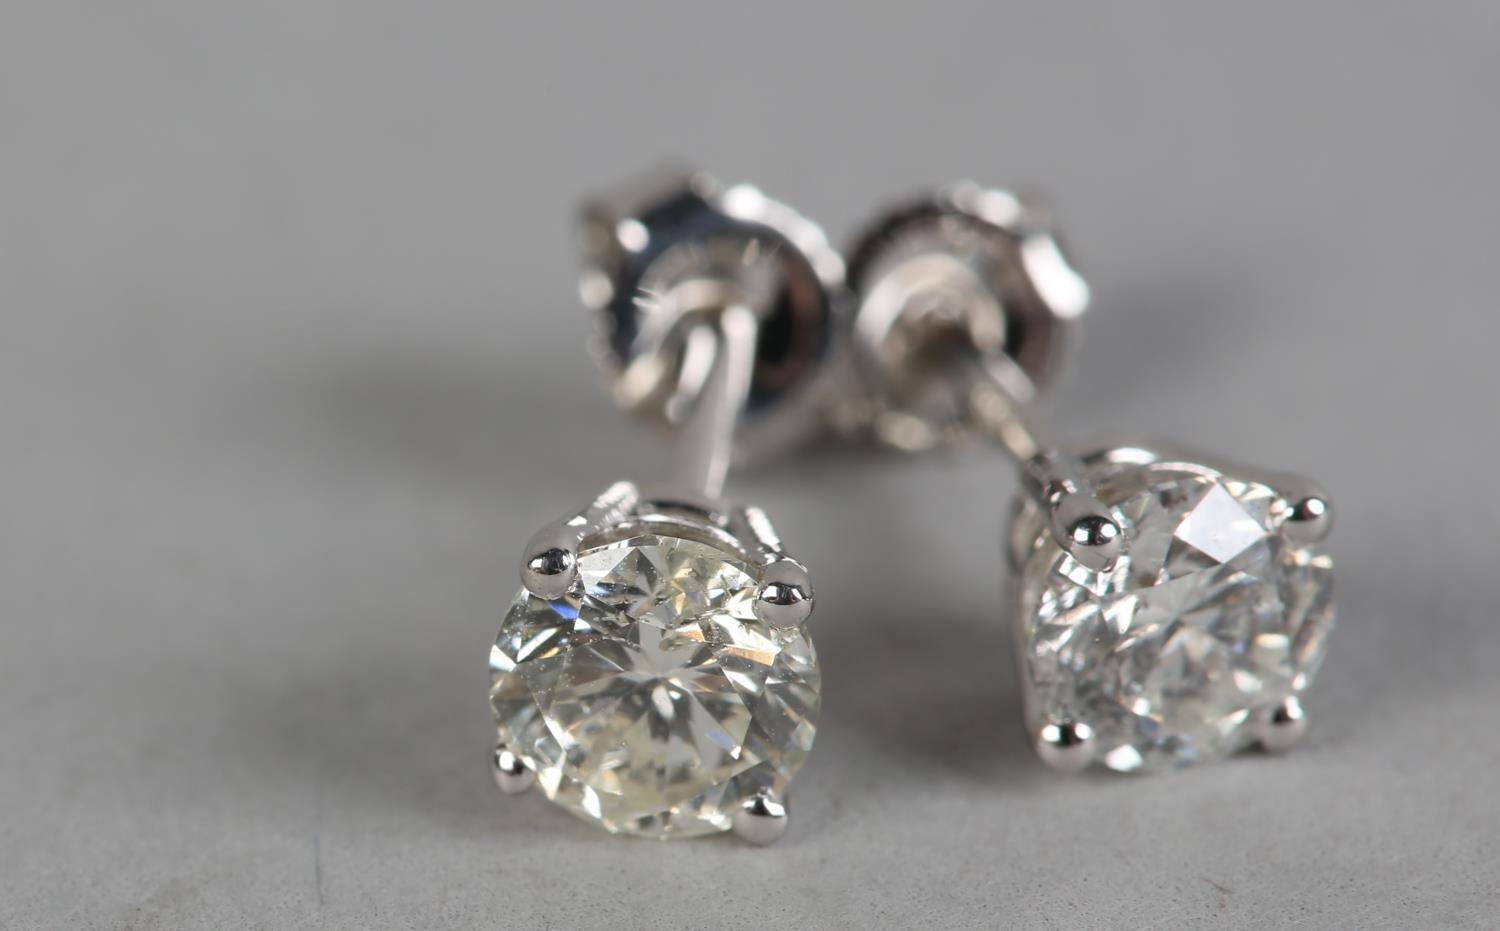 A PAIR OF DIAMOND STUD EARRINGS in 18ct white gold, each claw set with a brilliant cut stone on post - Image 3 of 4